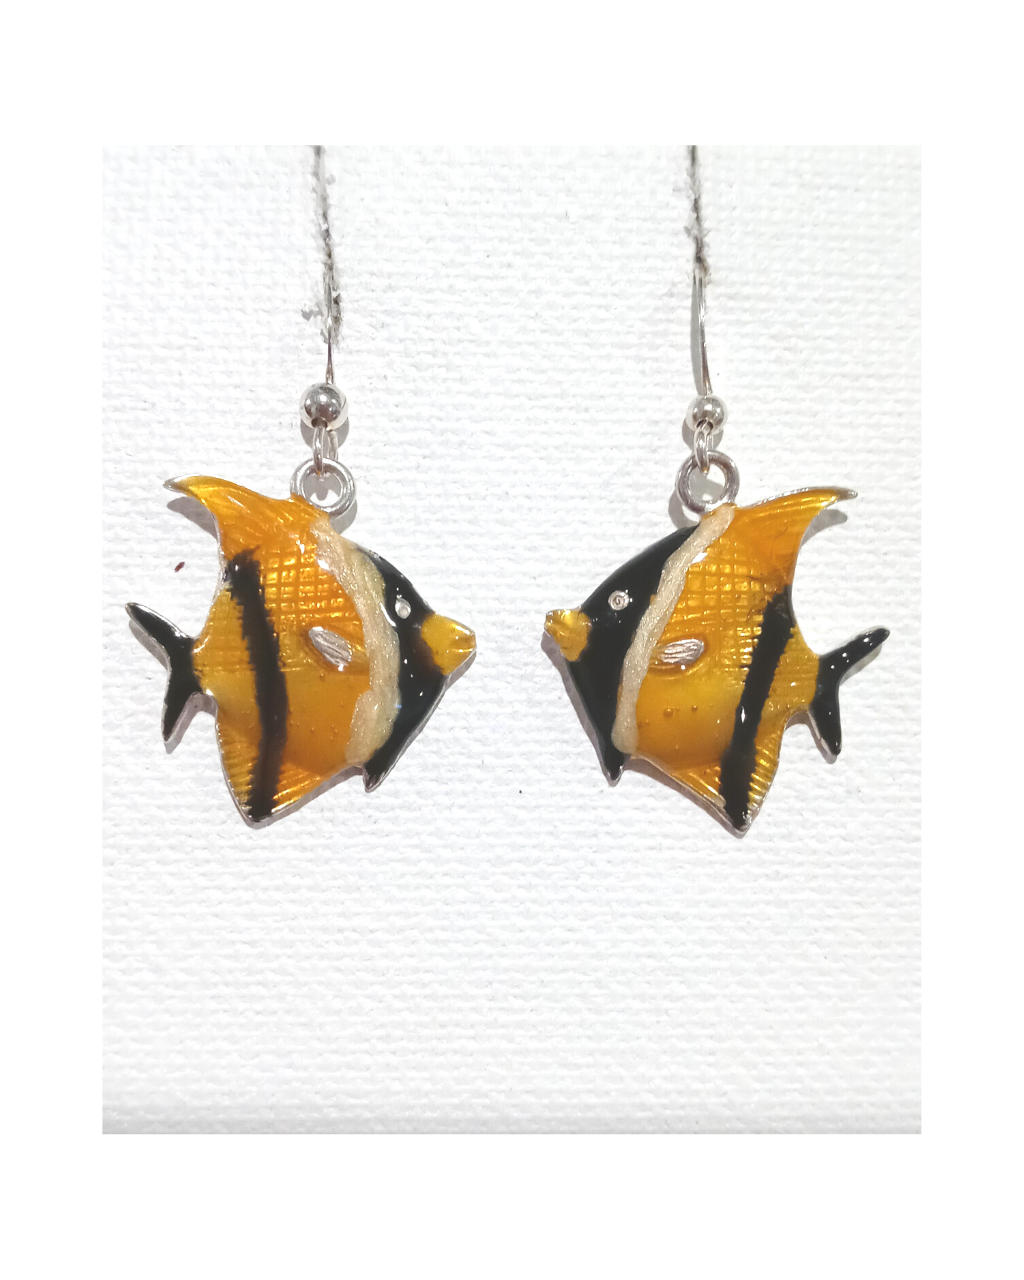 Exclusive Sterling Wearable Art Hand-enameled Black and Gold Moorish Idol Tropical Fish Earrings 1 1/2"H X 1 3/16"W